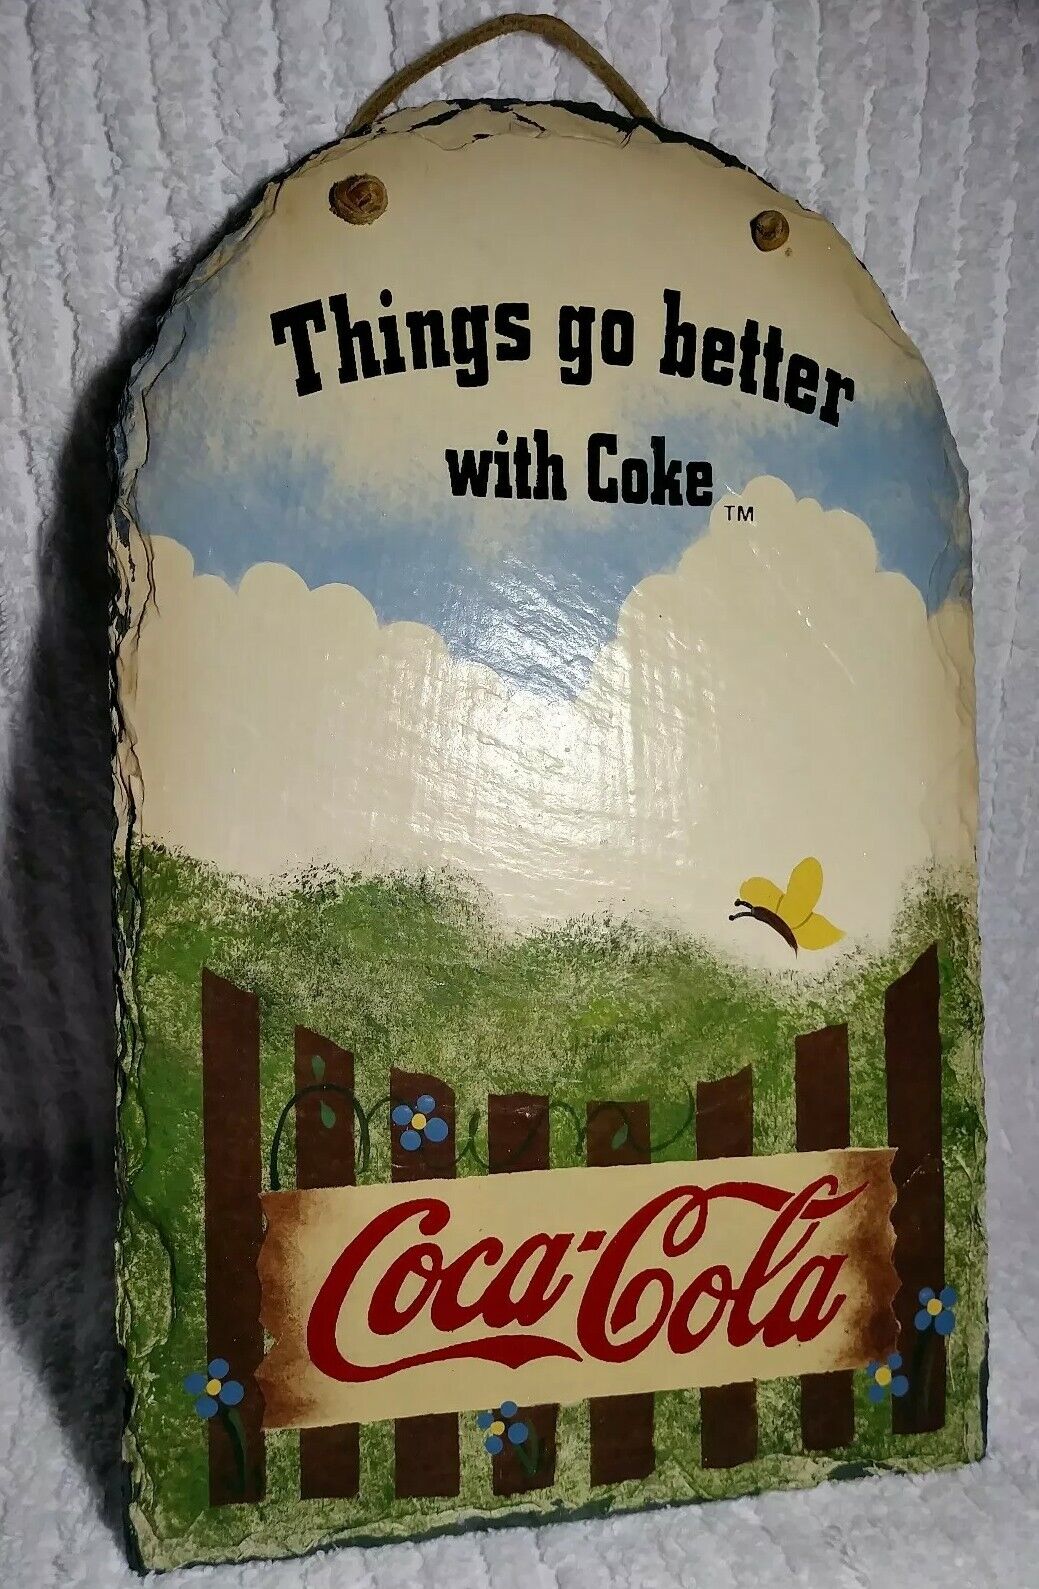 Vintage Coca Cola Sign Plaque Slate 98 Wall Soda Coke Butterfly Collectible RARE